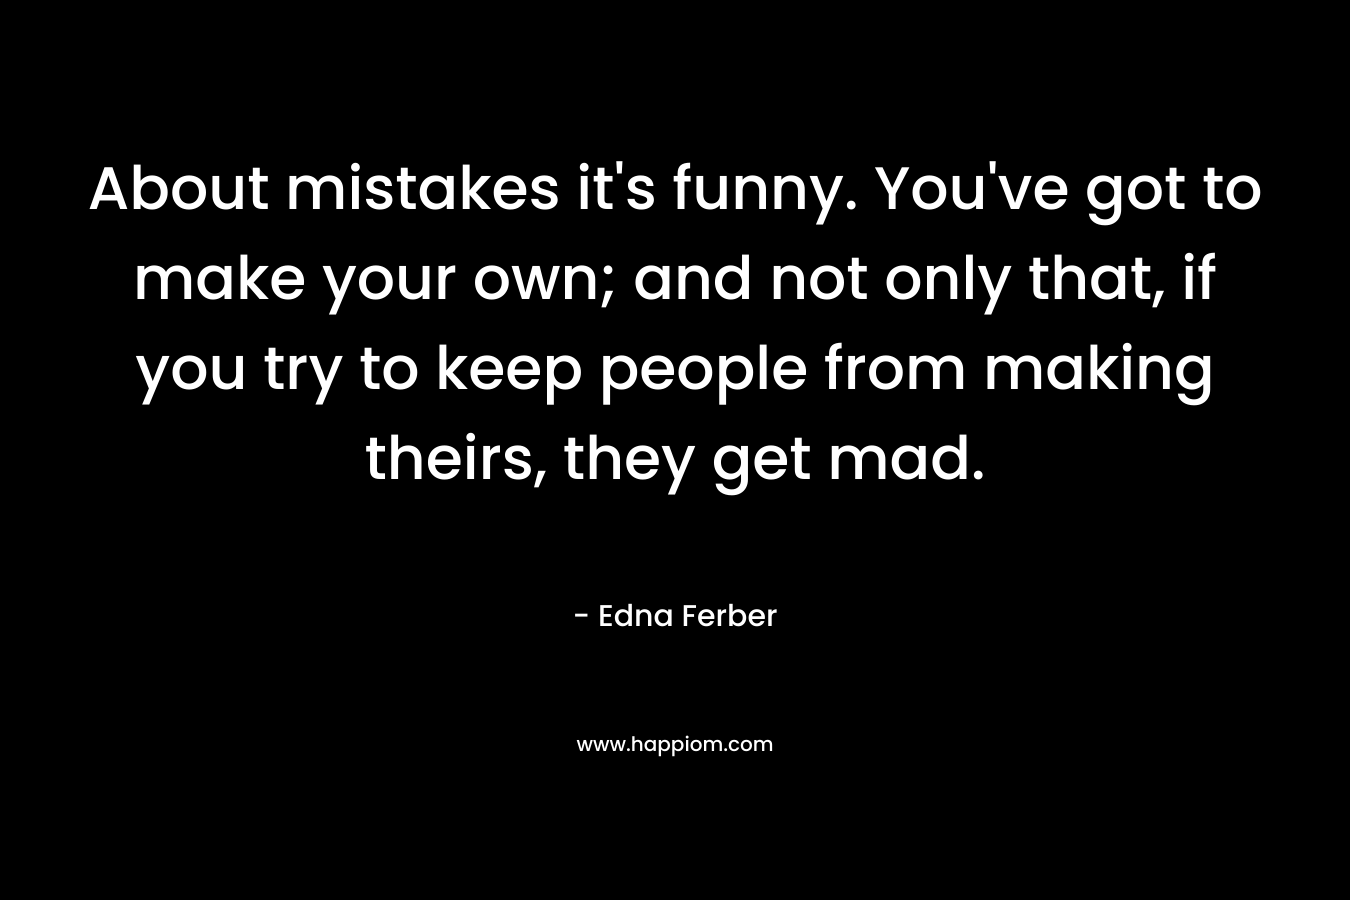 About mistakes it’s funny. You’ve got to make your own; and not only that, if you try to keep people from making theirs, they get mad. – Edna Ferber